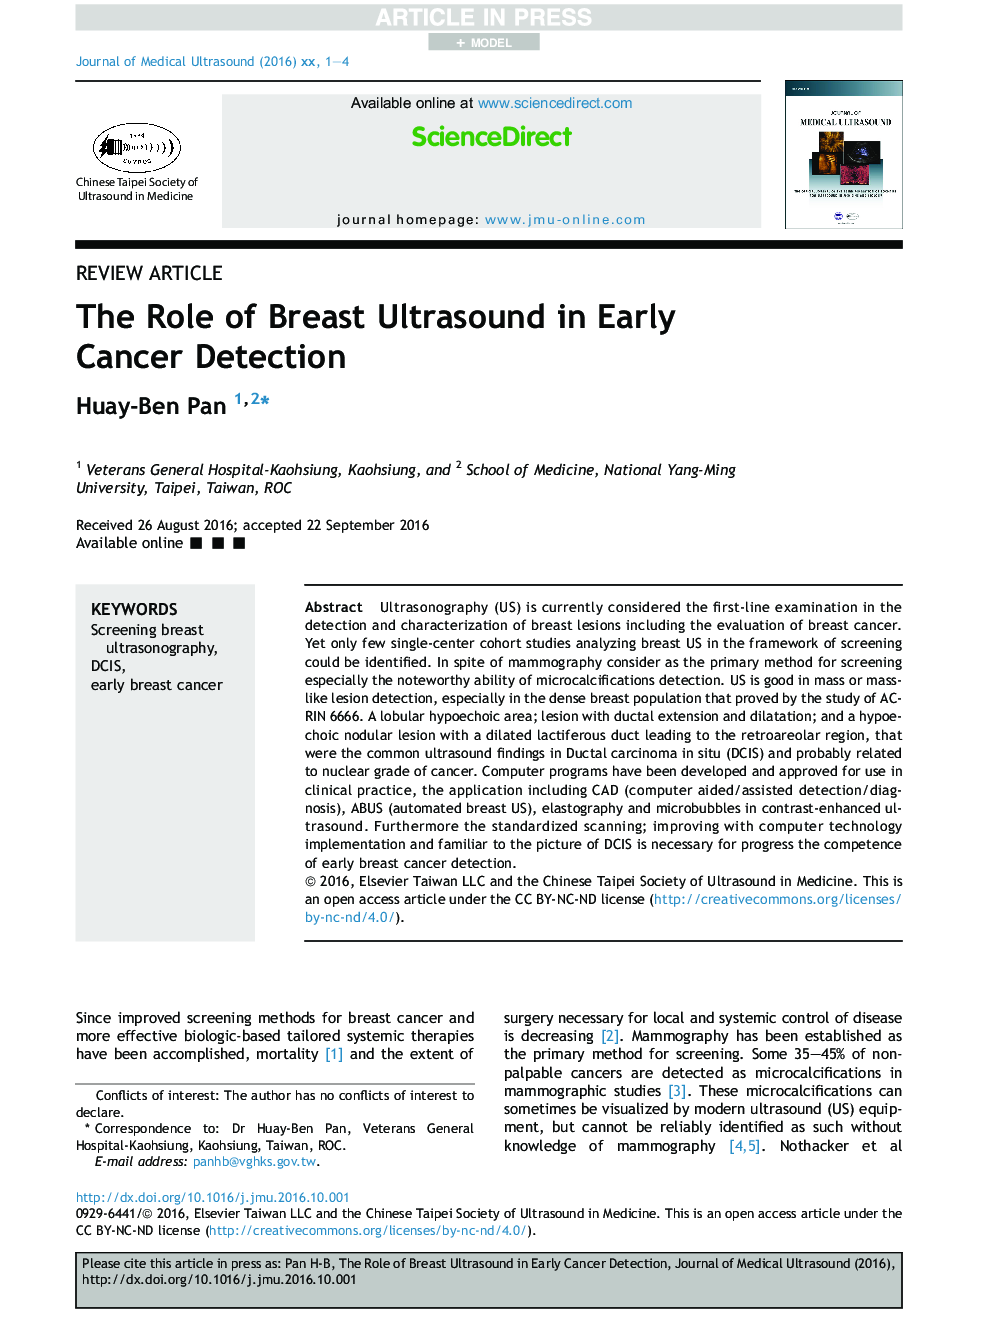 The Role of Breast Ultrasound in Early Cancer Detection